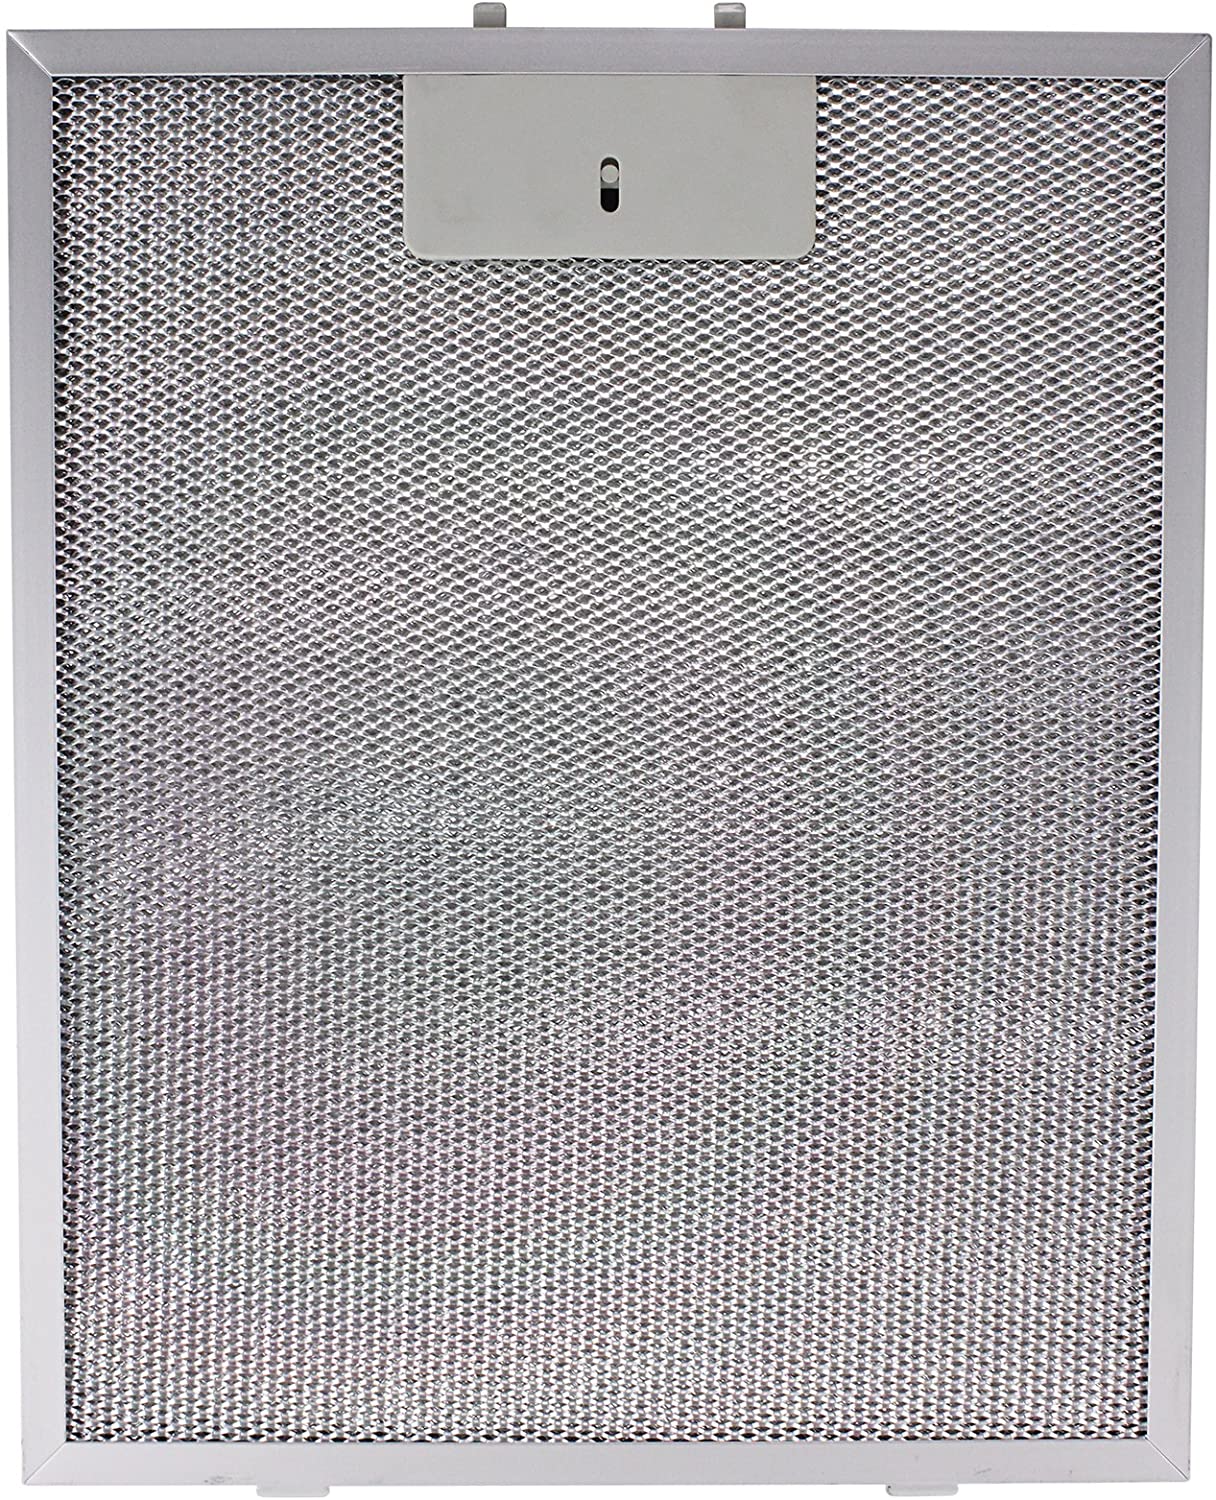 Cooker Hood Extractor Metal Grease Mesh Filter (Silver, 320 x 260mm)